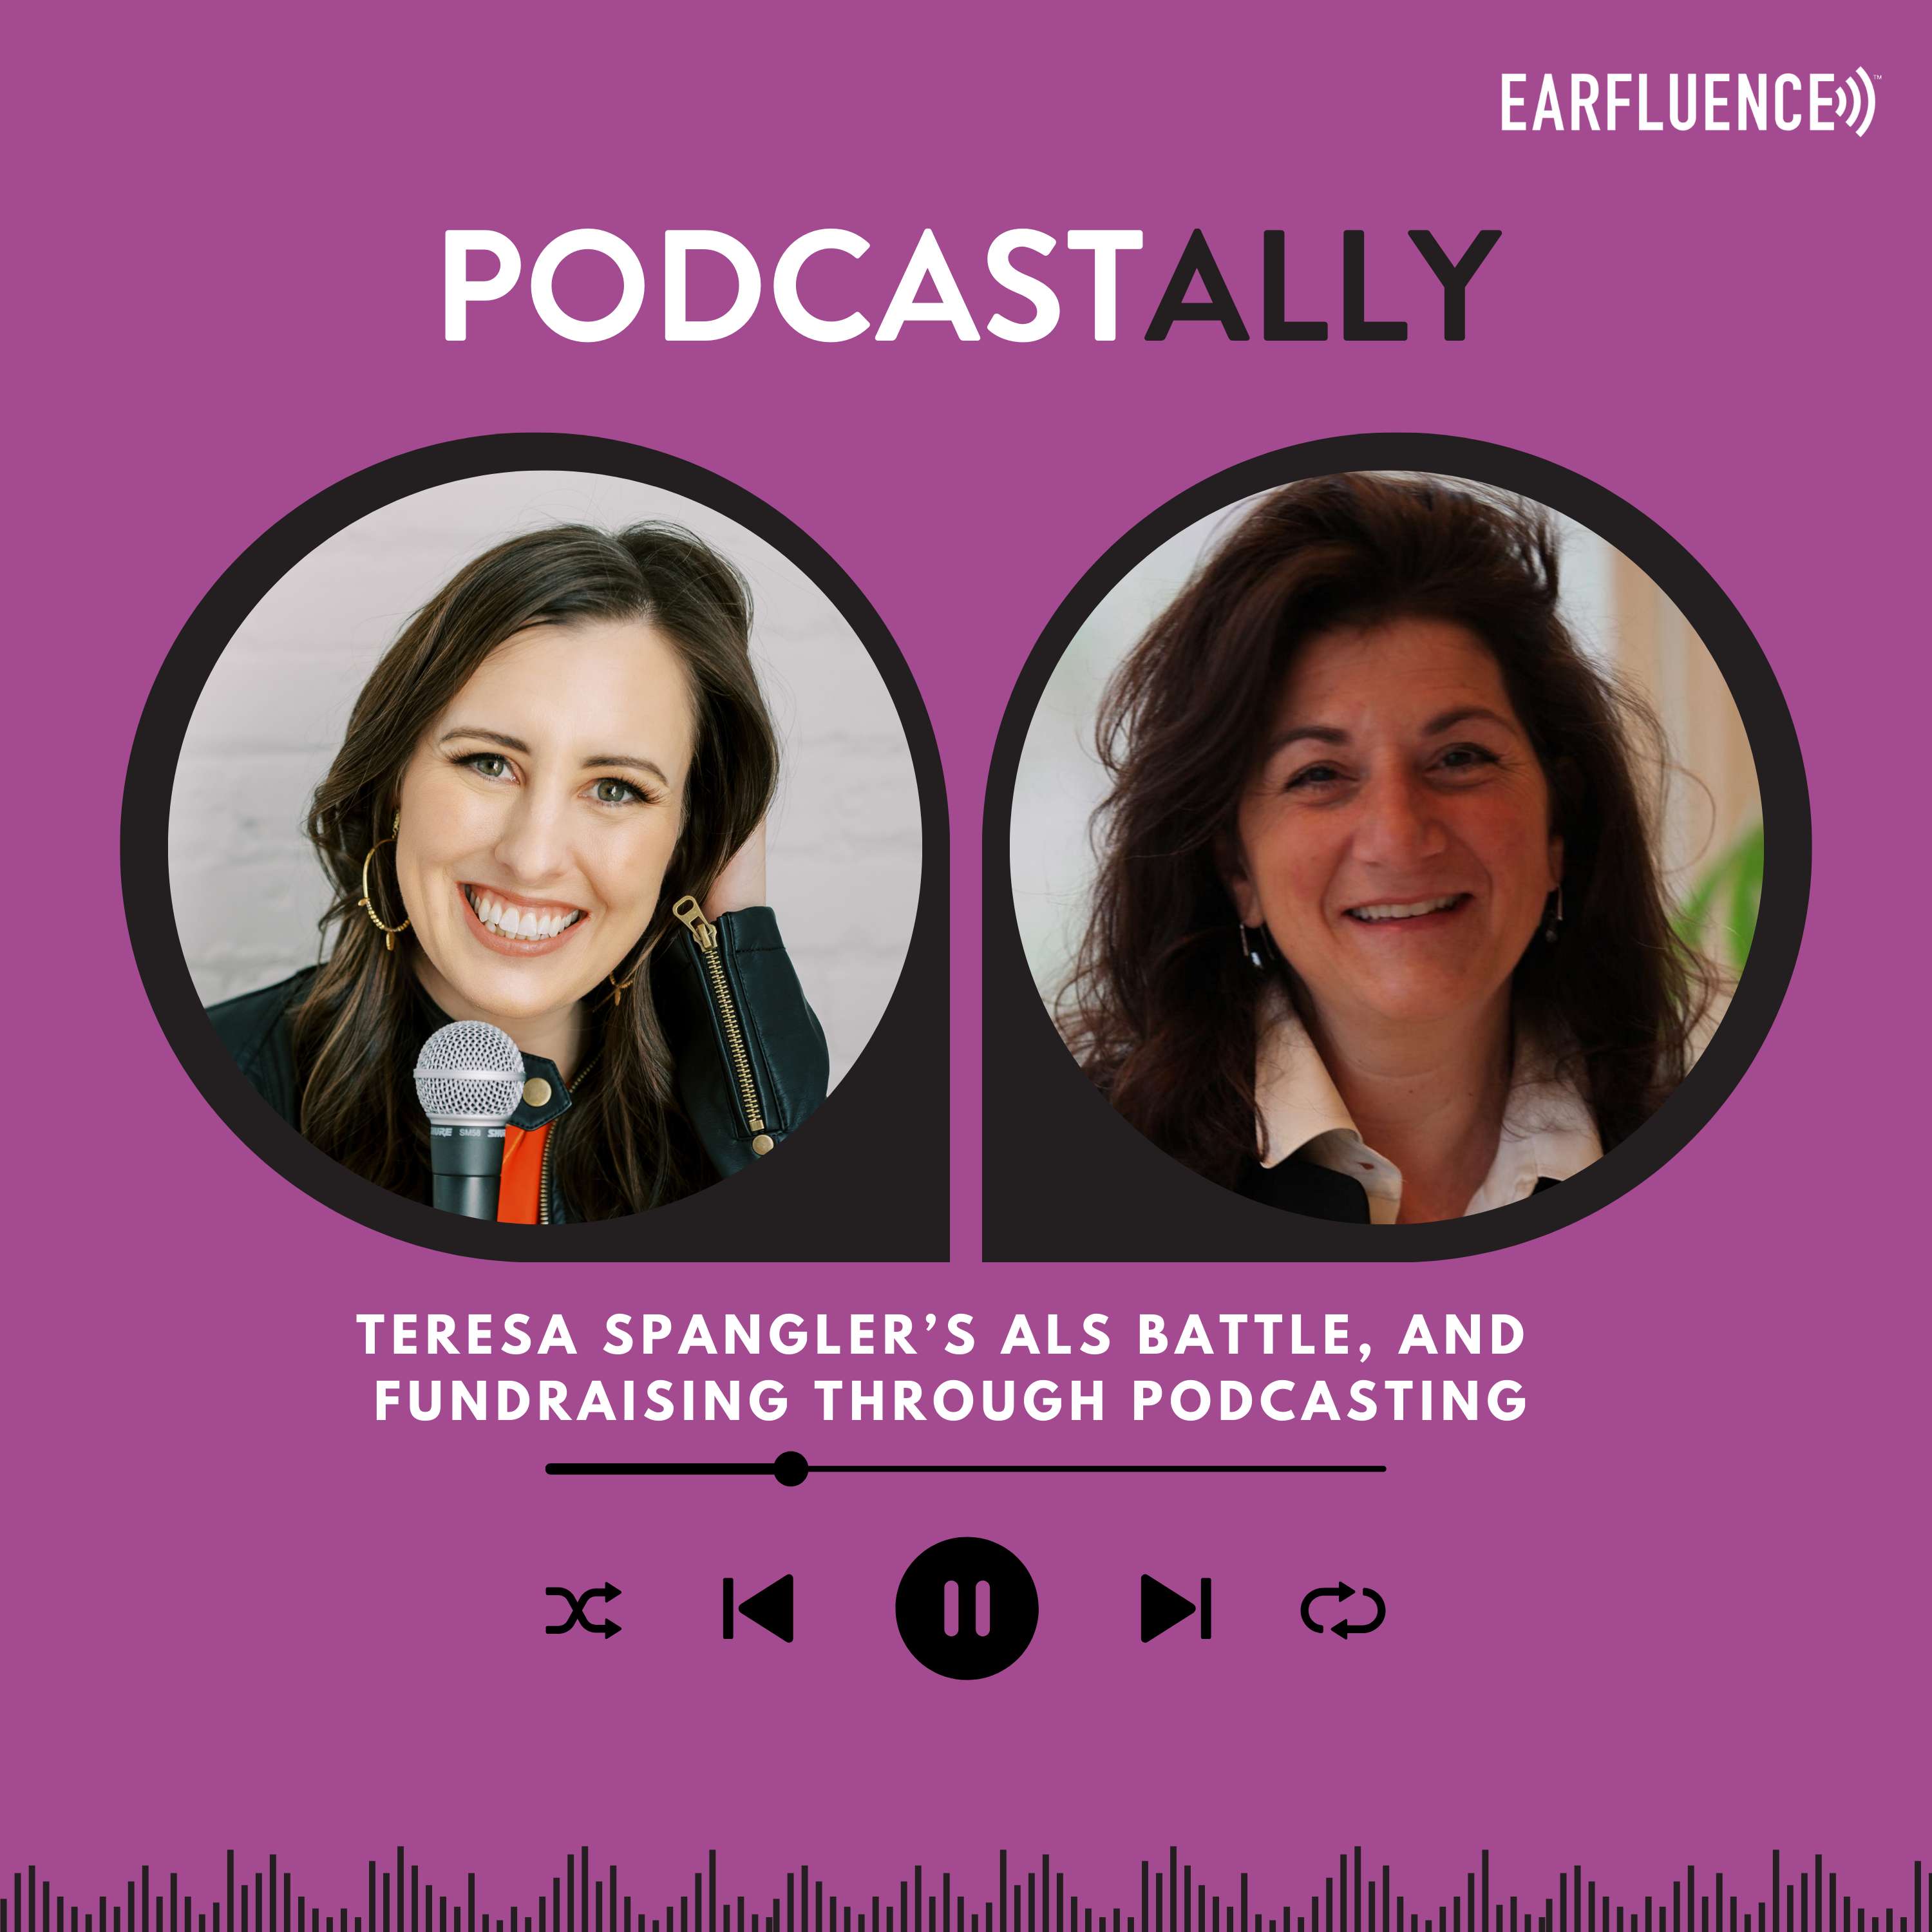 Podcasting for a Cause: Teresa Spangler's Fight to Amplify ALS Awareness